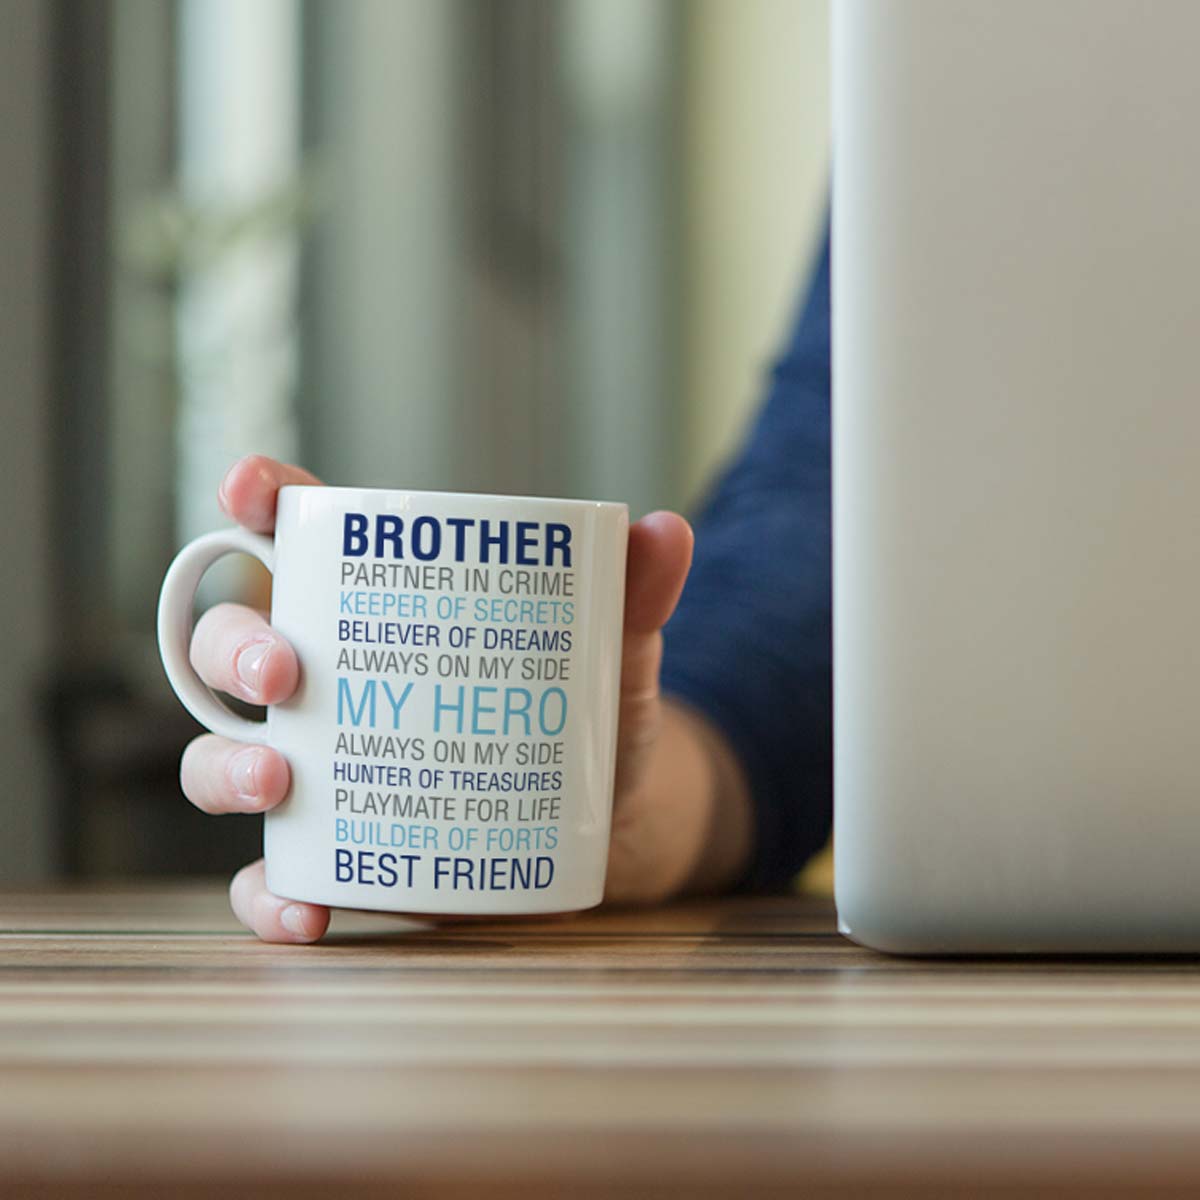 Brothers are Best Friends Mug